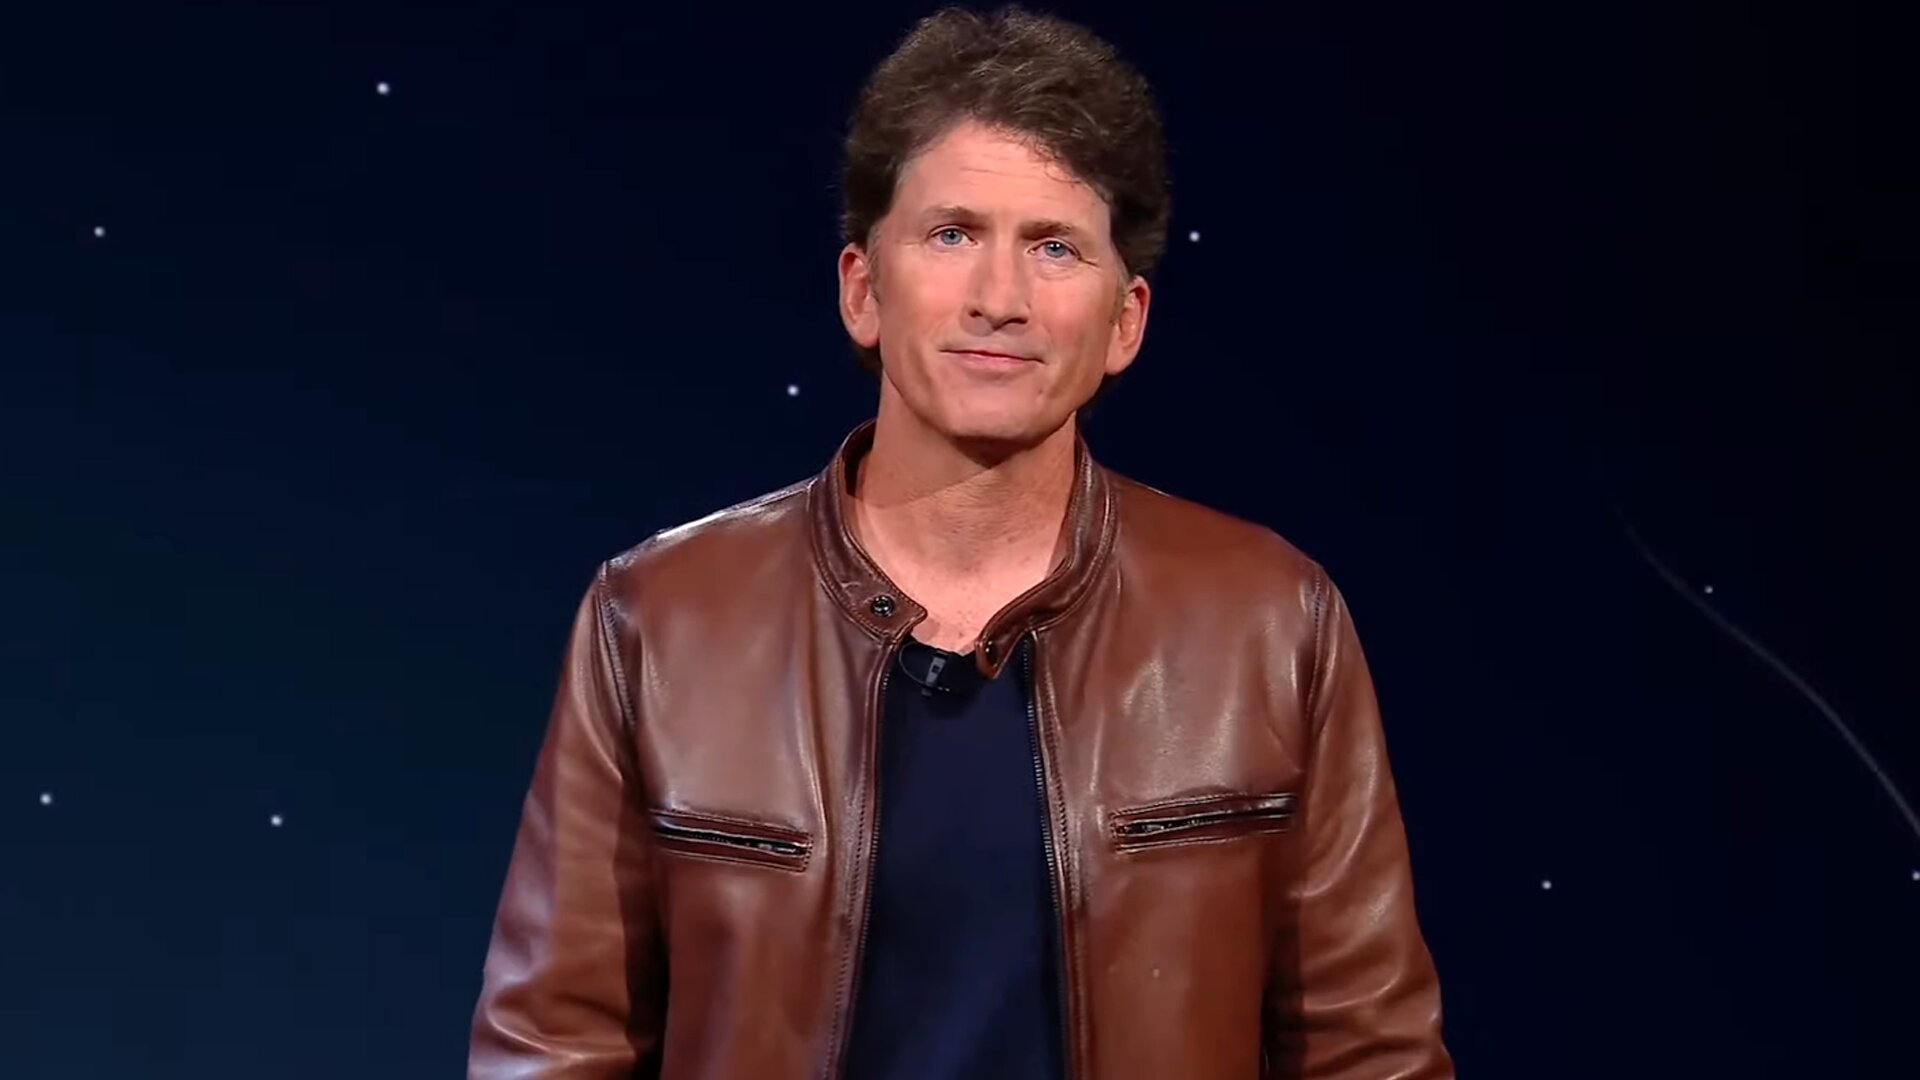 Hidden Fallout 76 message claims Todd Howard is 